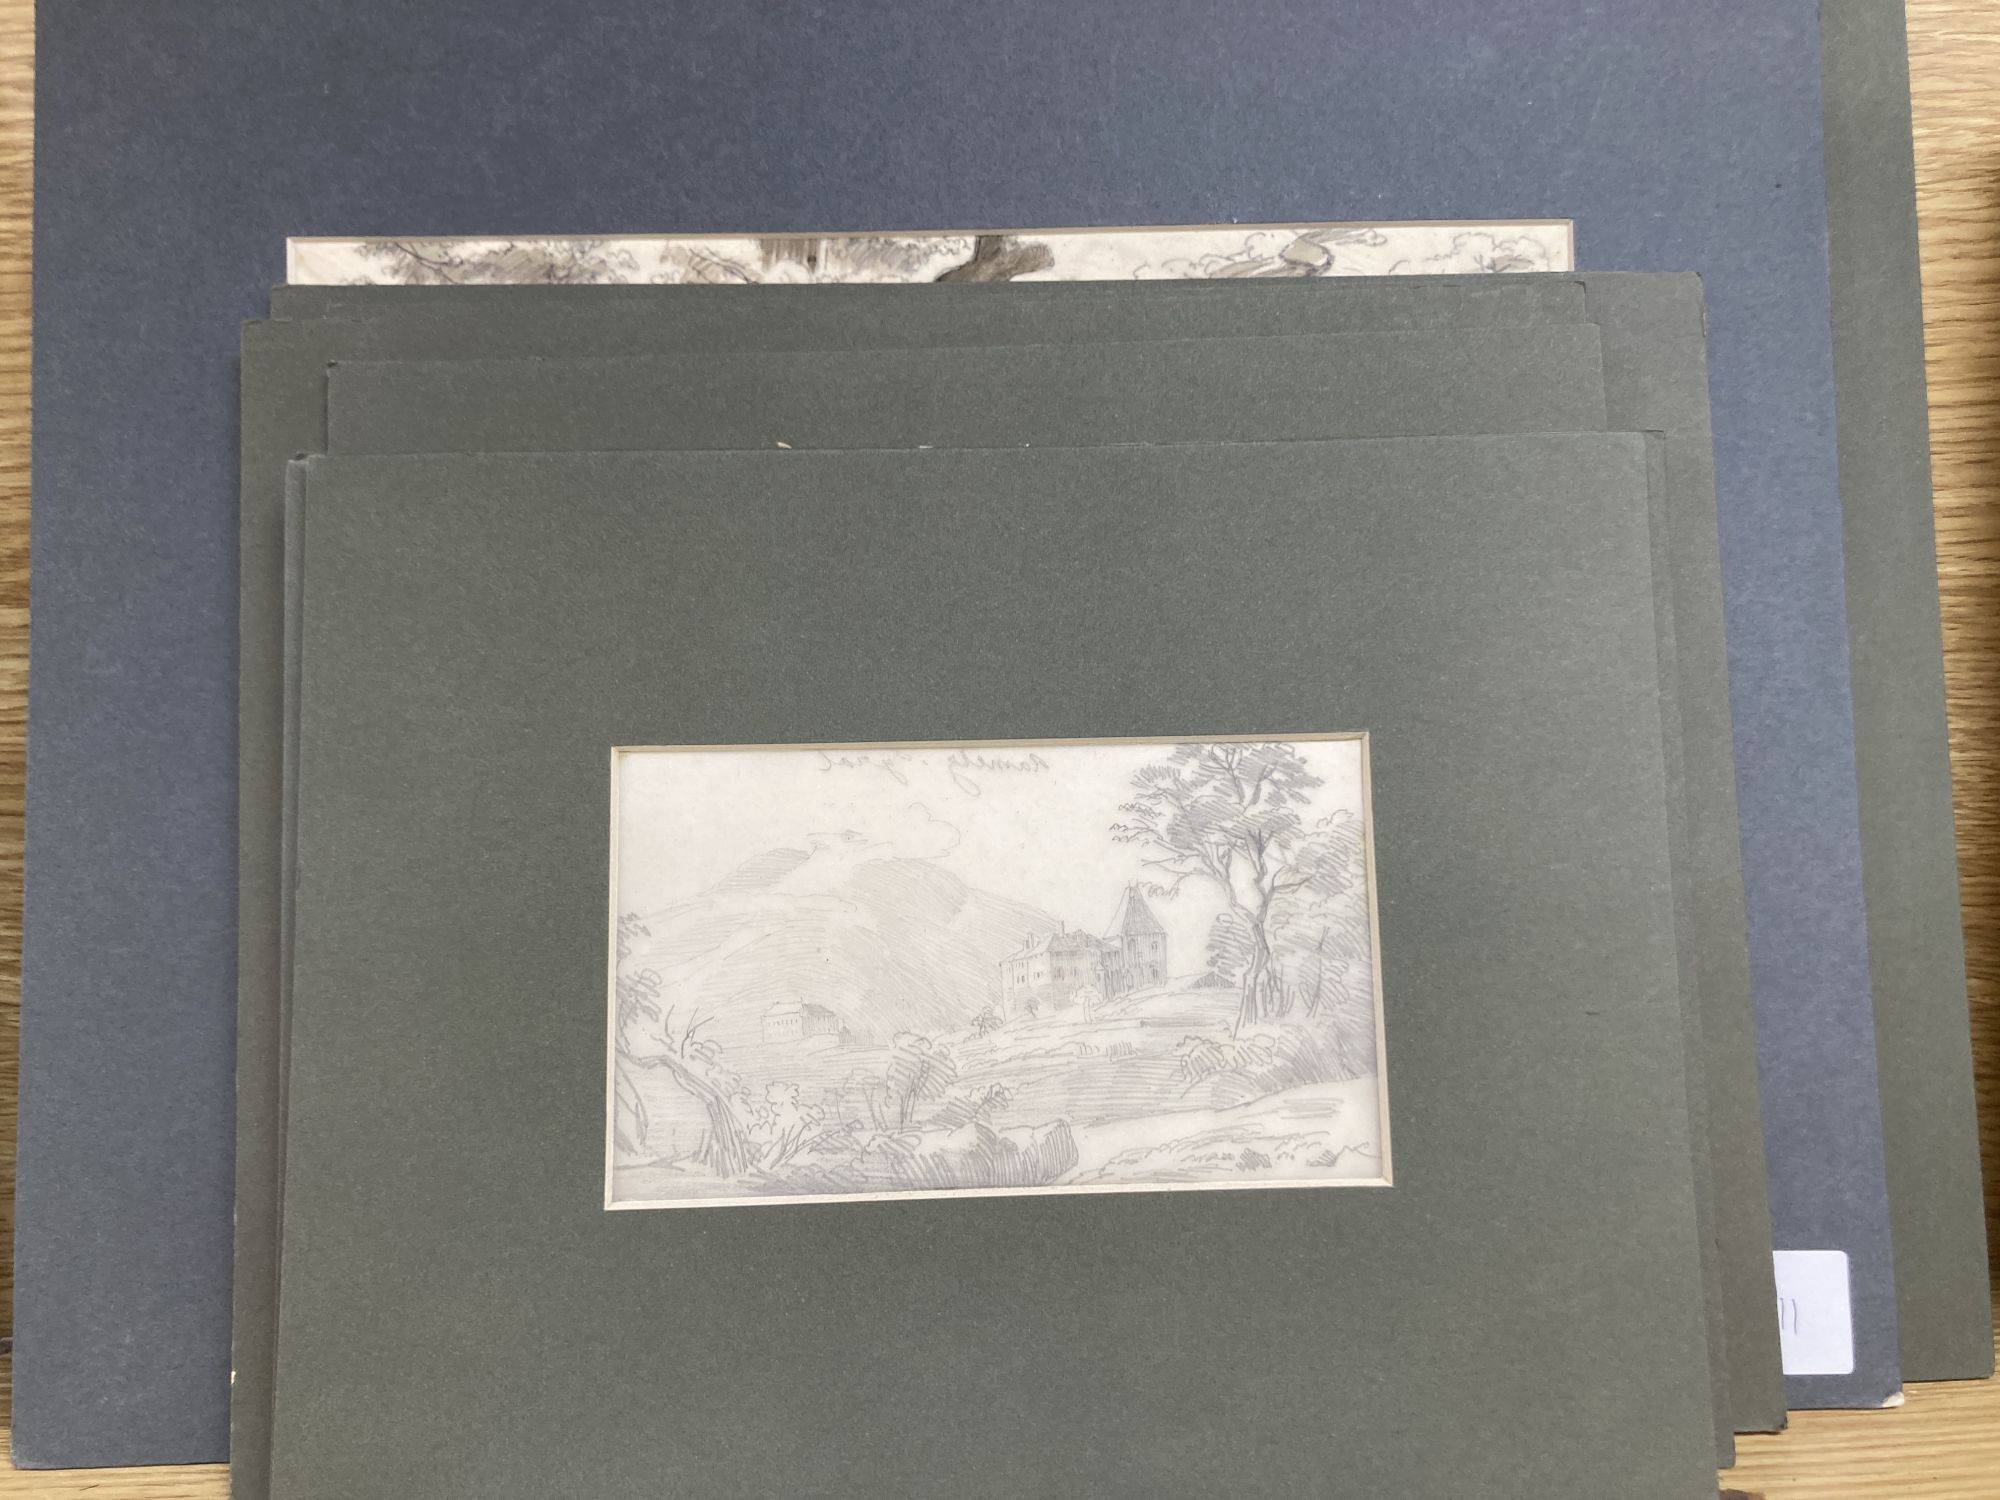 William Henry Bartlett (1809-1854), eleven unframed pencil drawings, Topographical studies, most inscribed See Brief Memoir of W.H.B